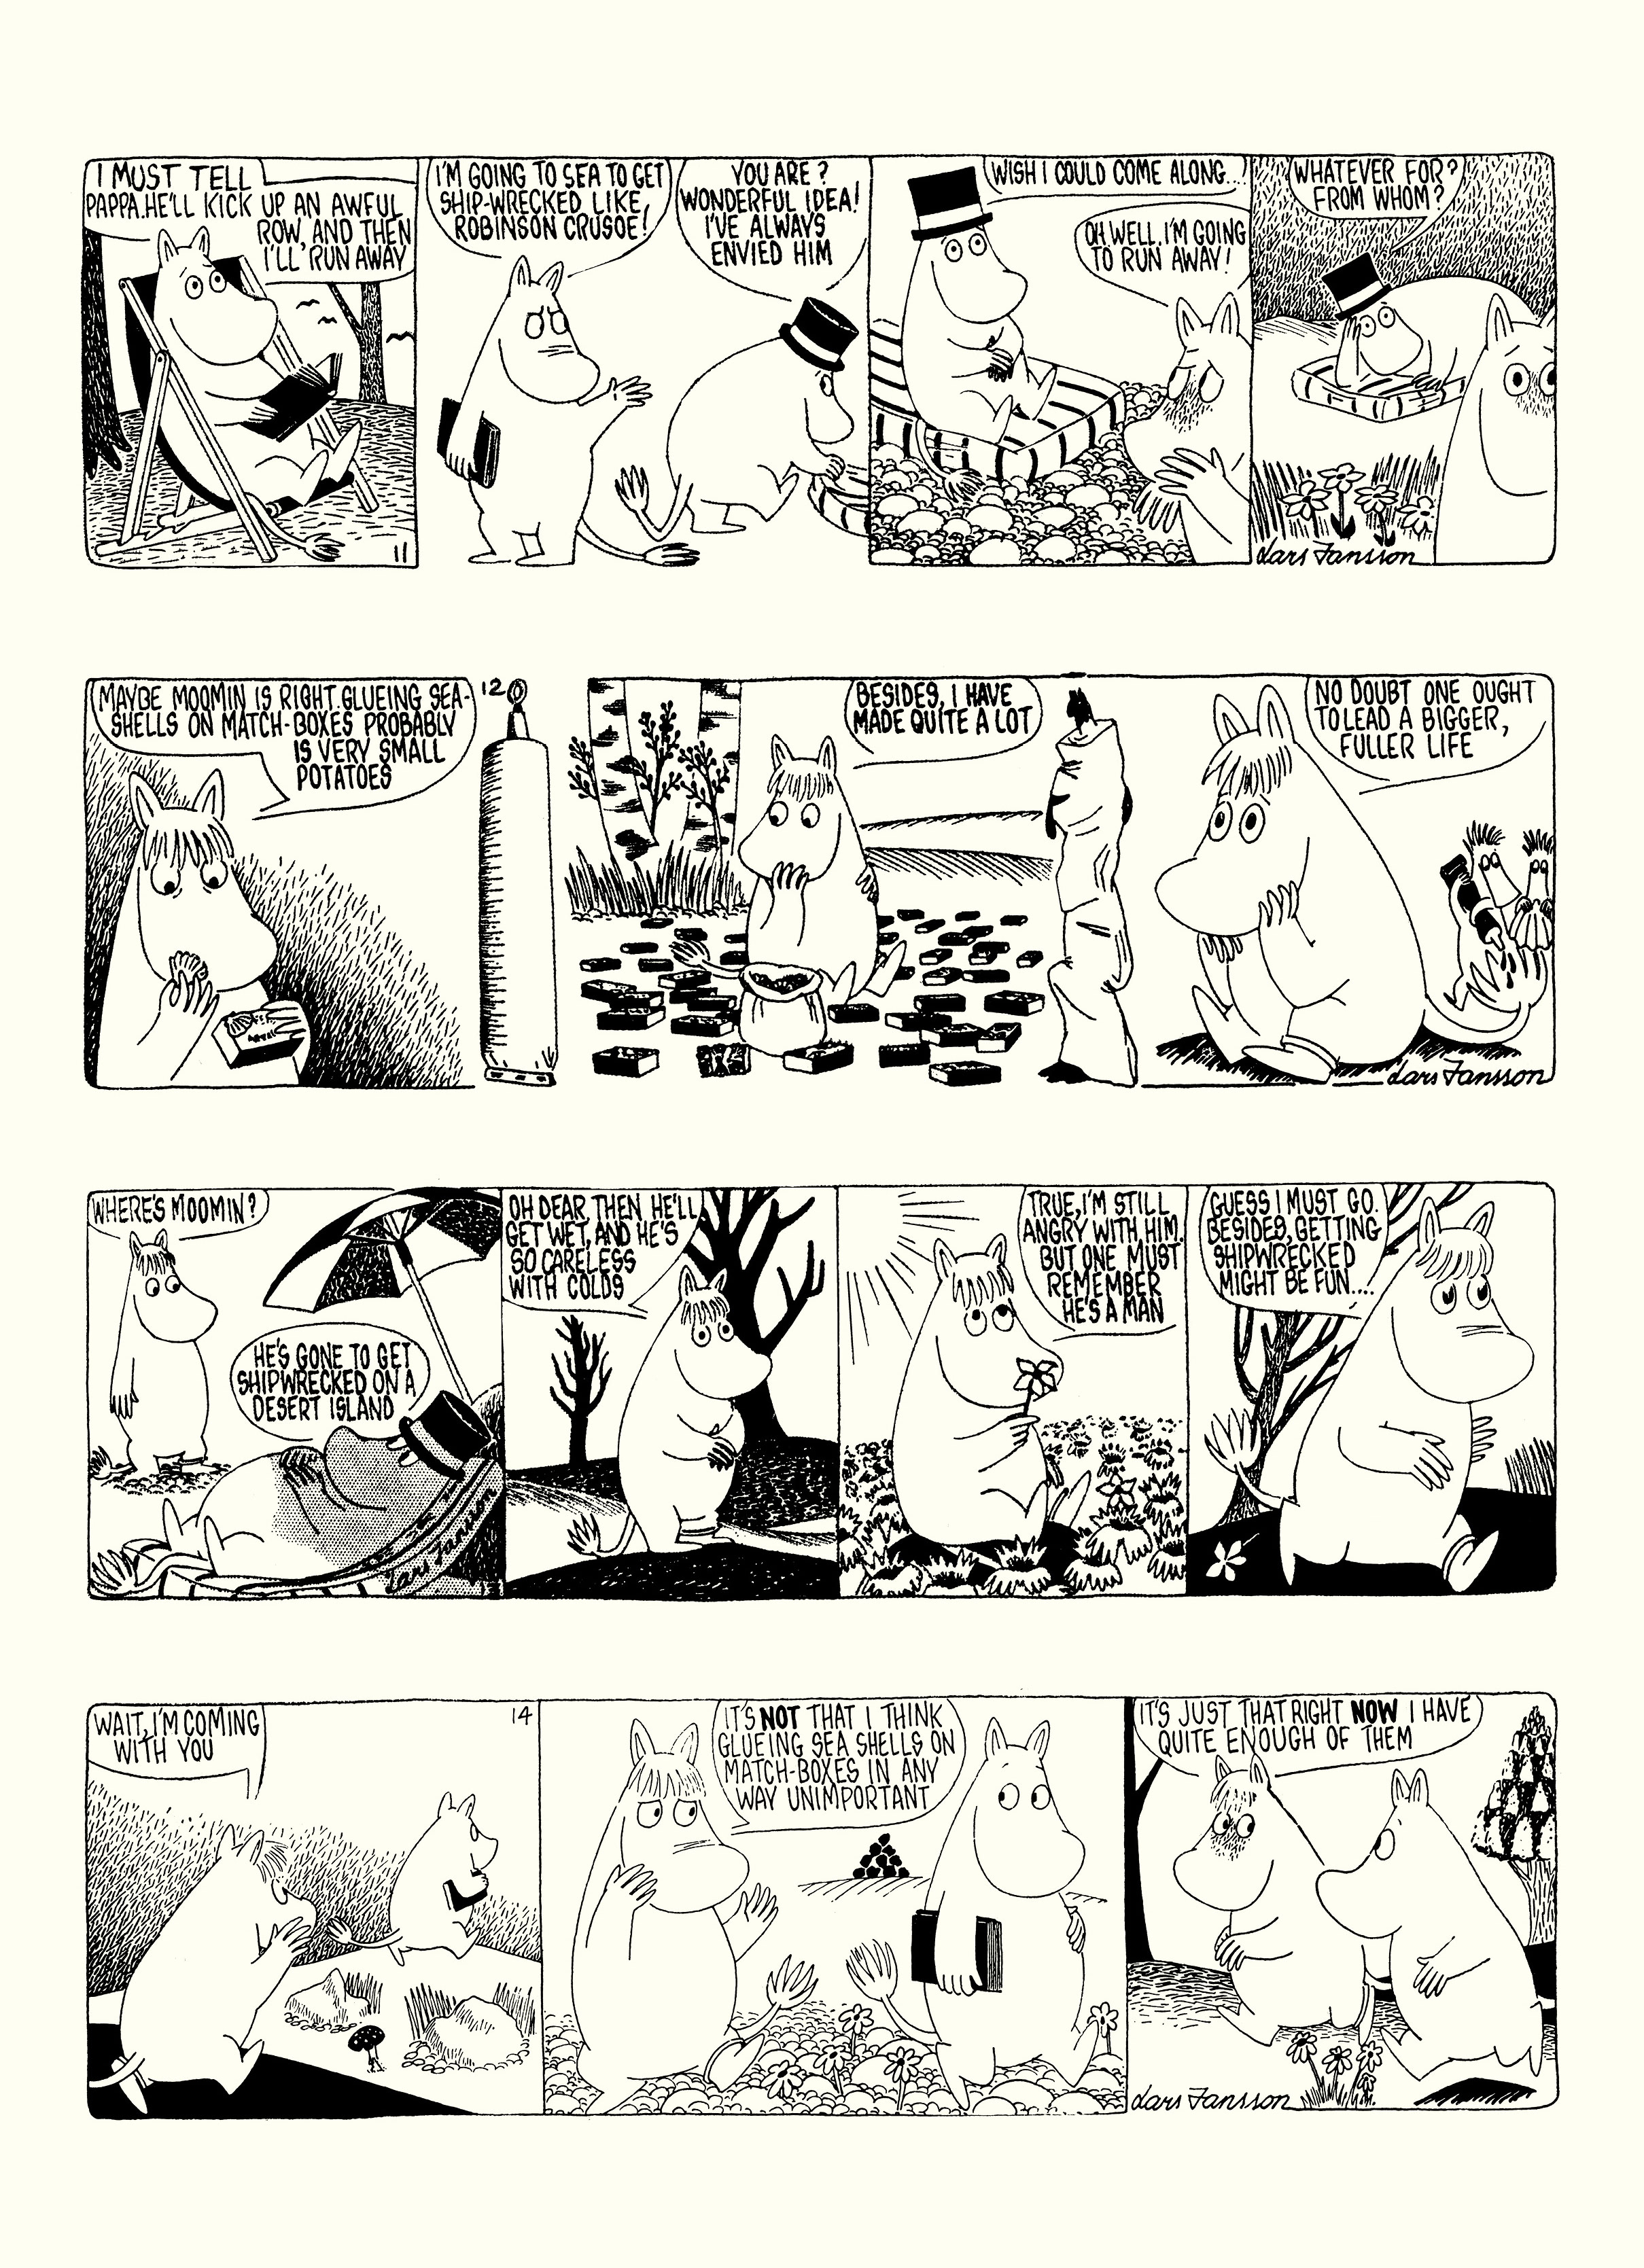 Read online Moomin: The Complete Lars Jansson Comic Strip comic -  Issue # TPB 8 - 8